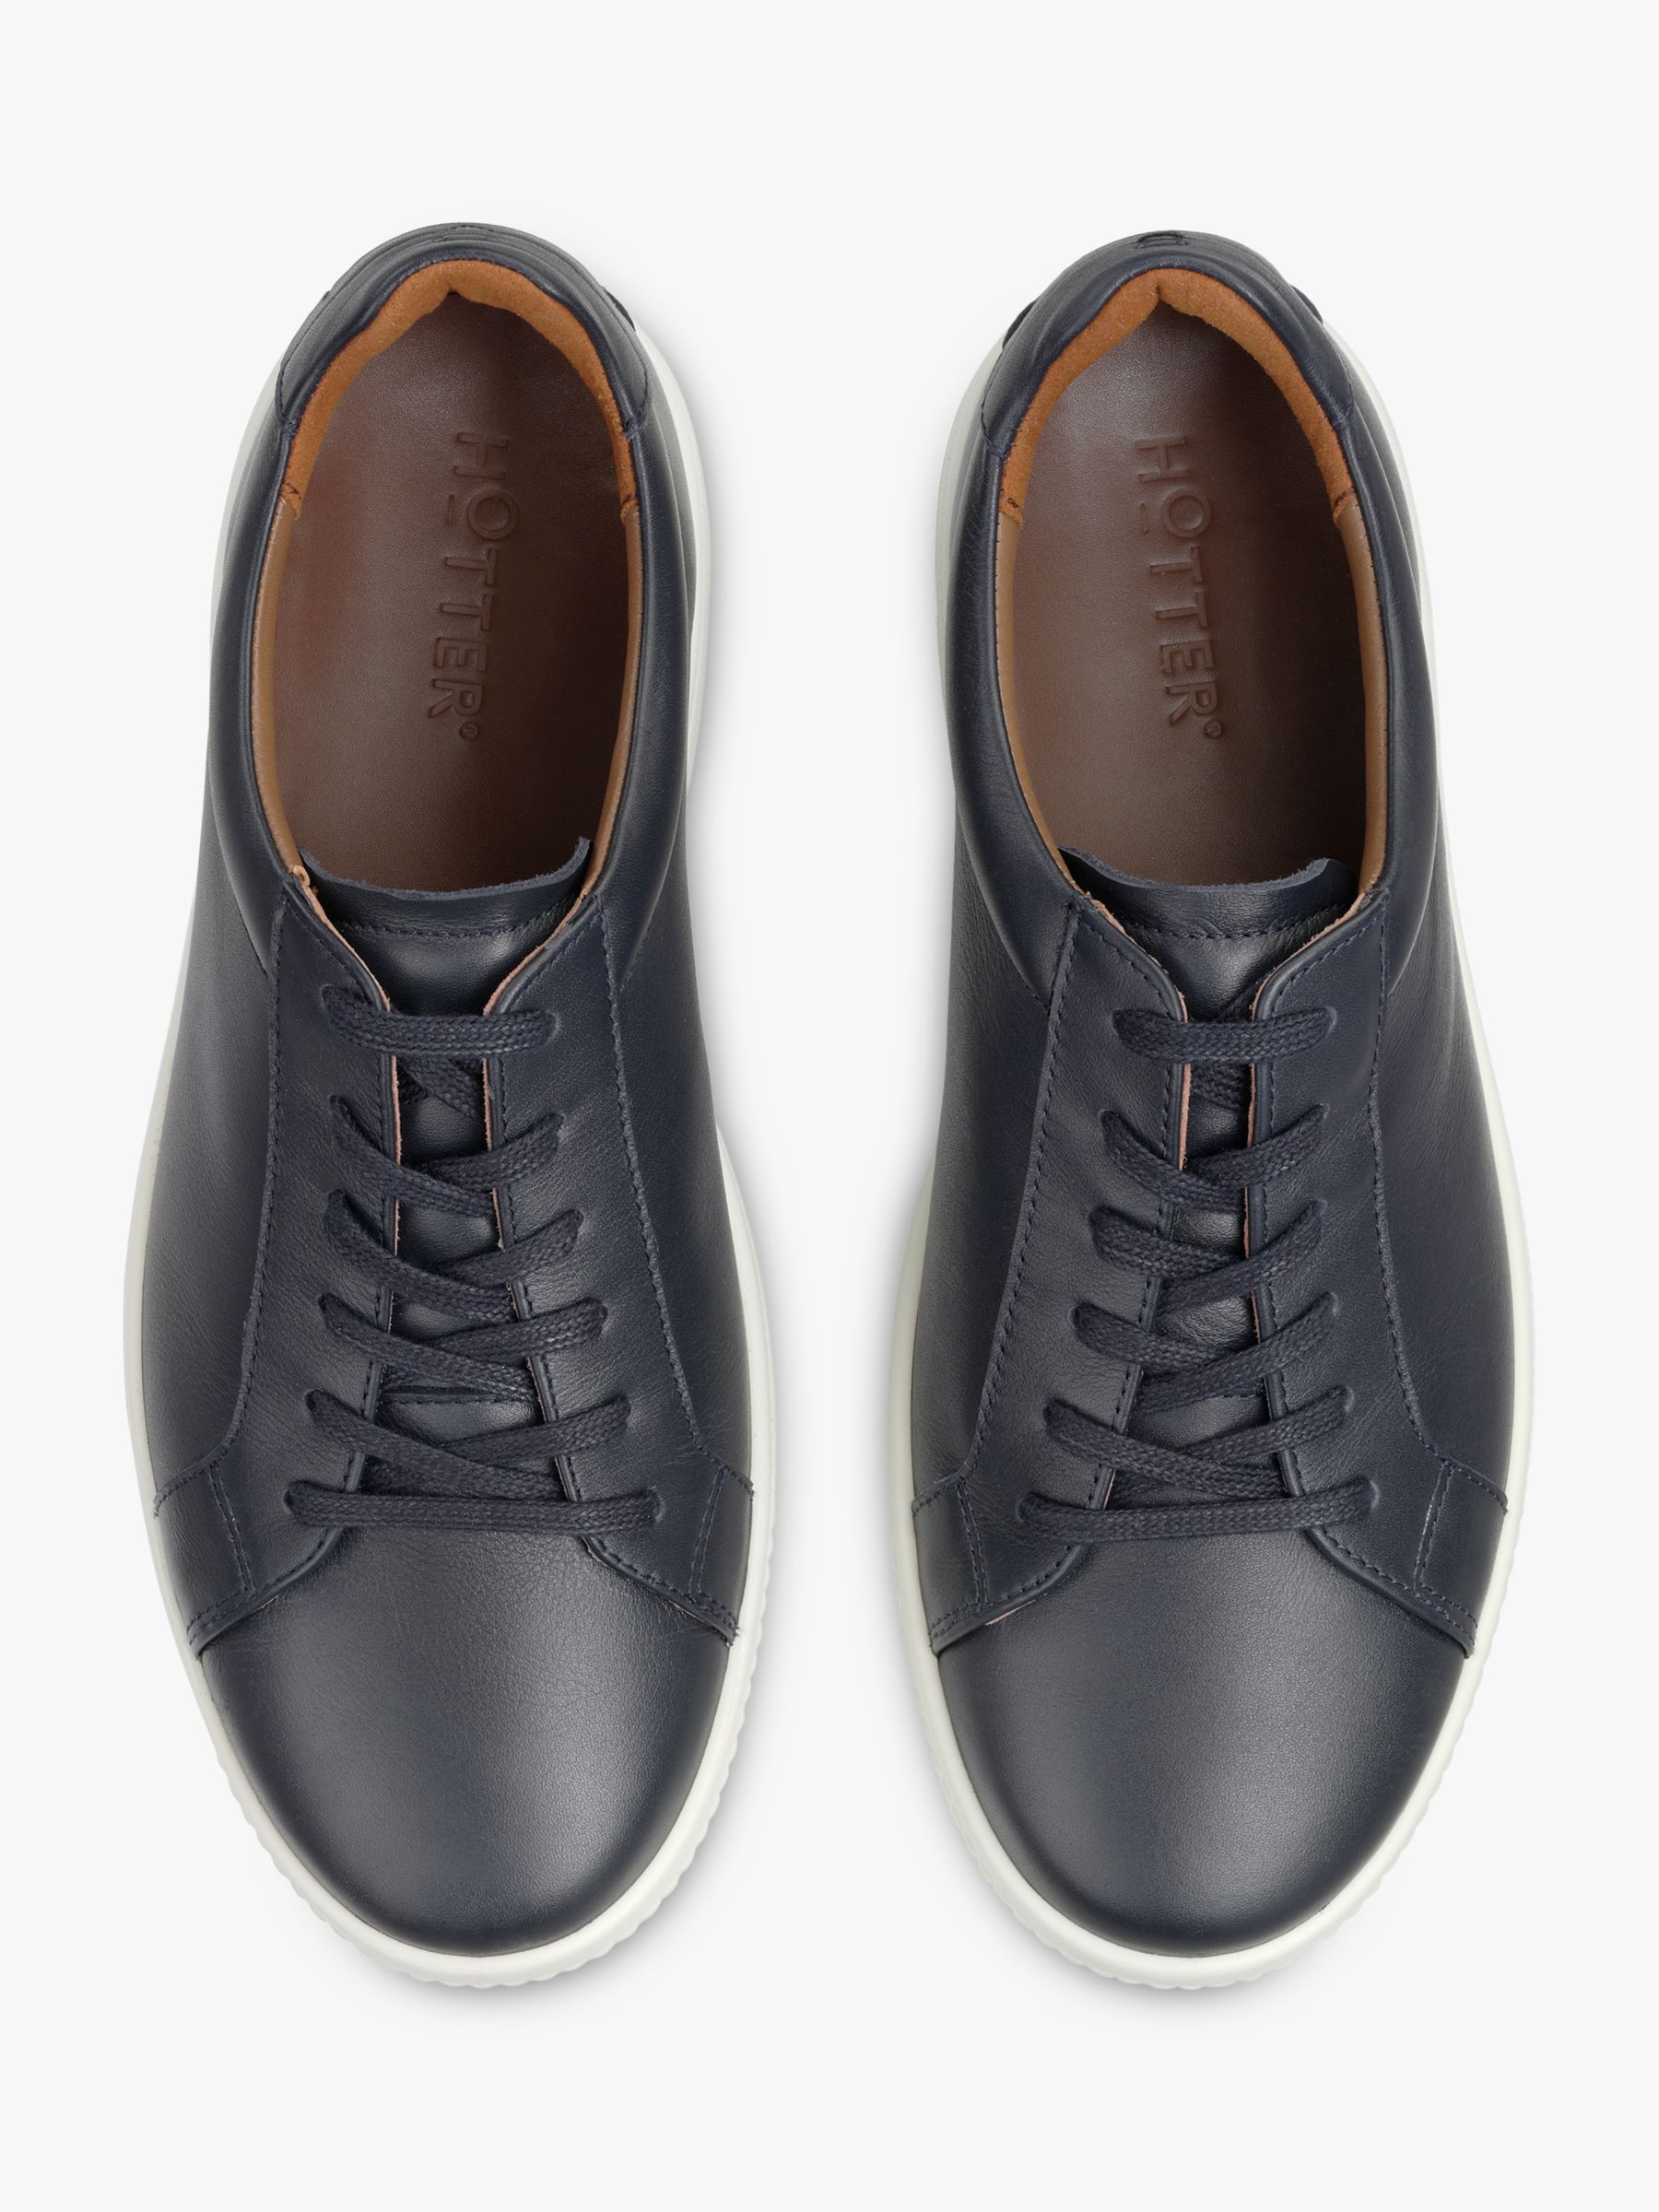 Hotter Oliver Classic Leather Trainers, Navy, 8.5